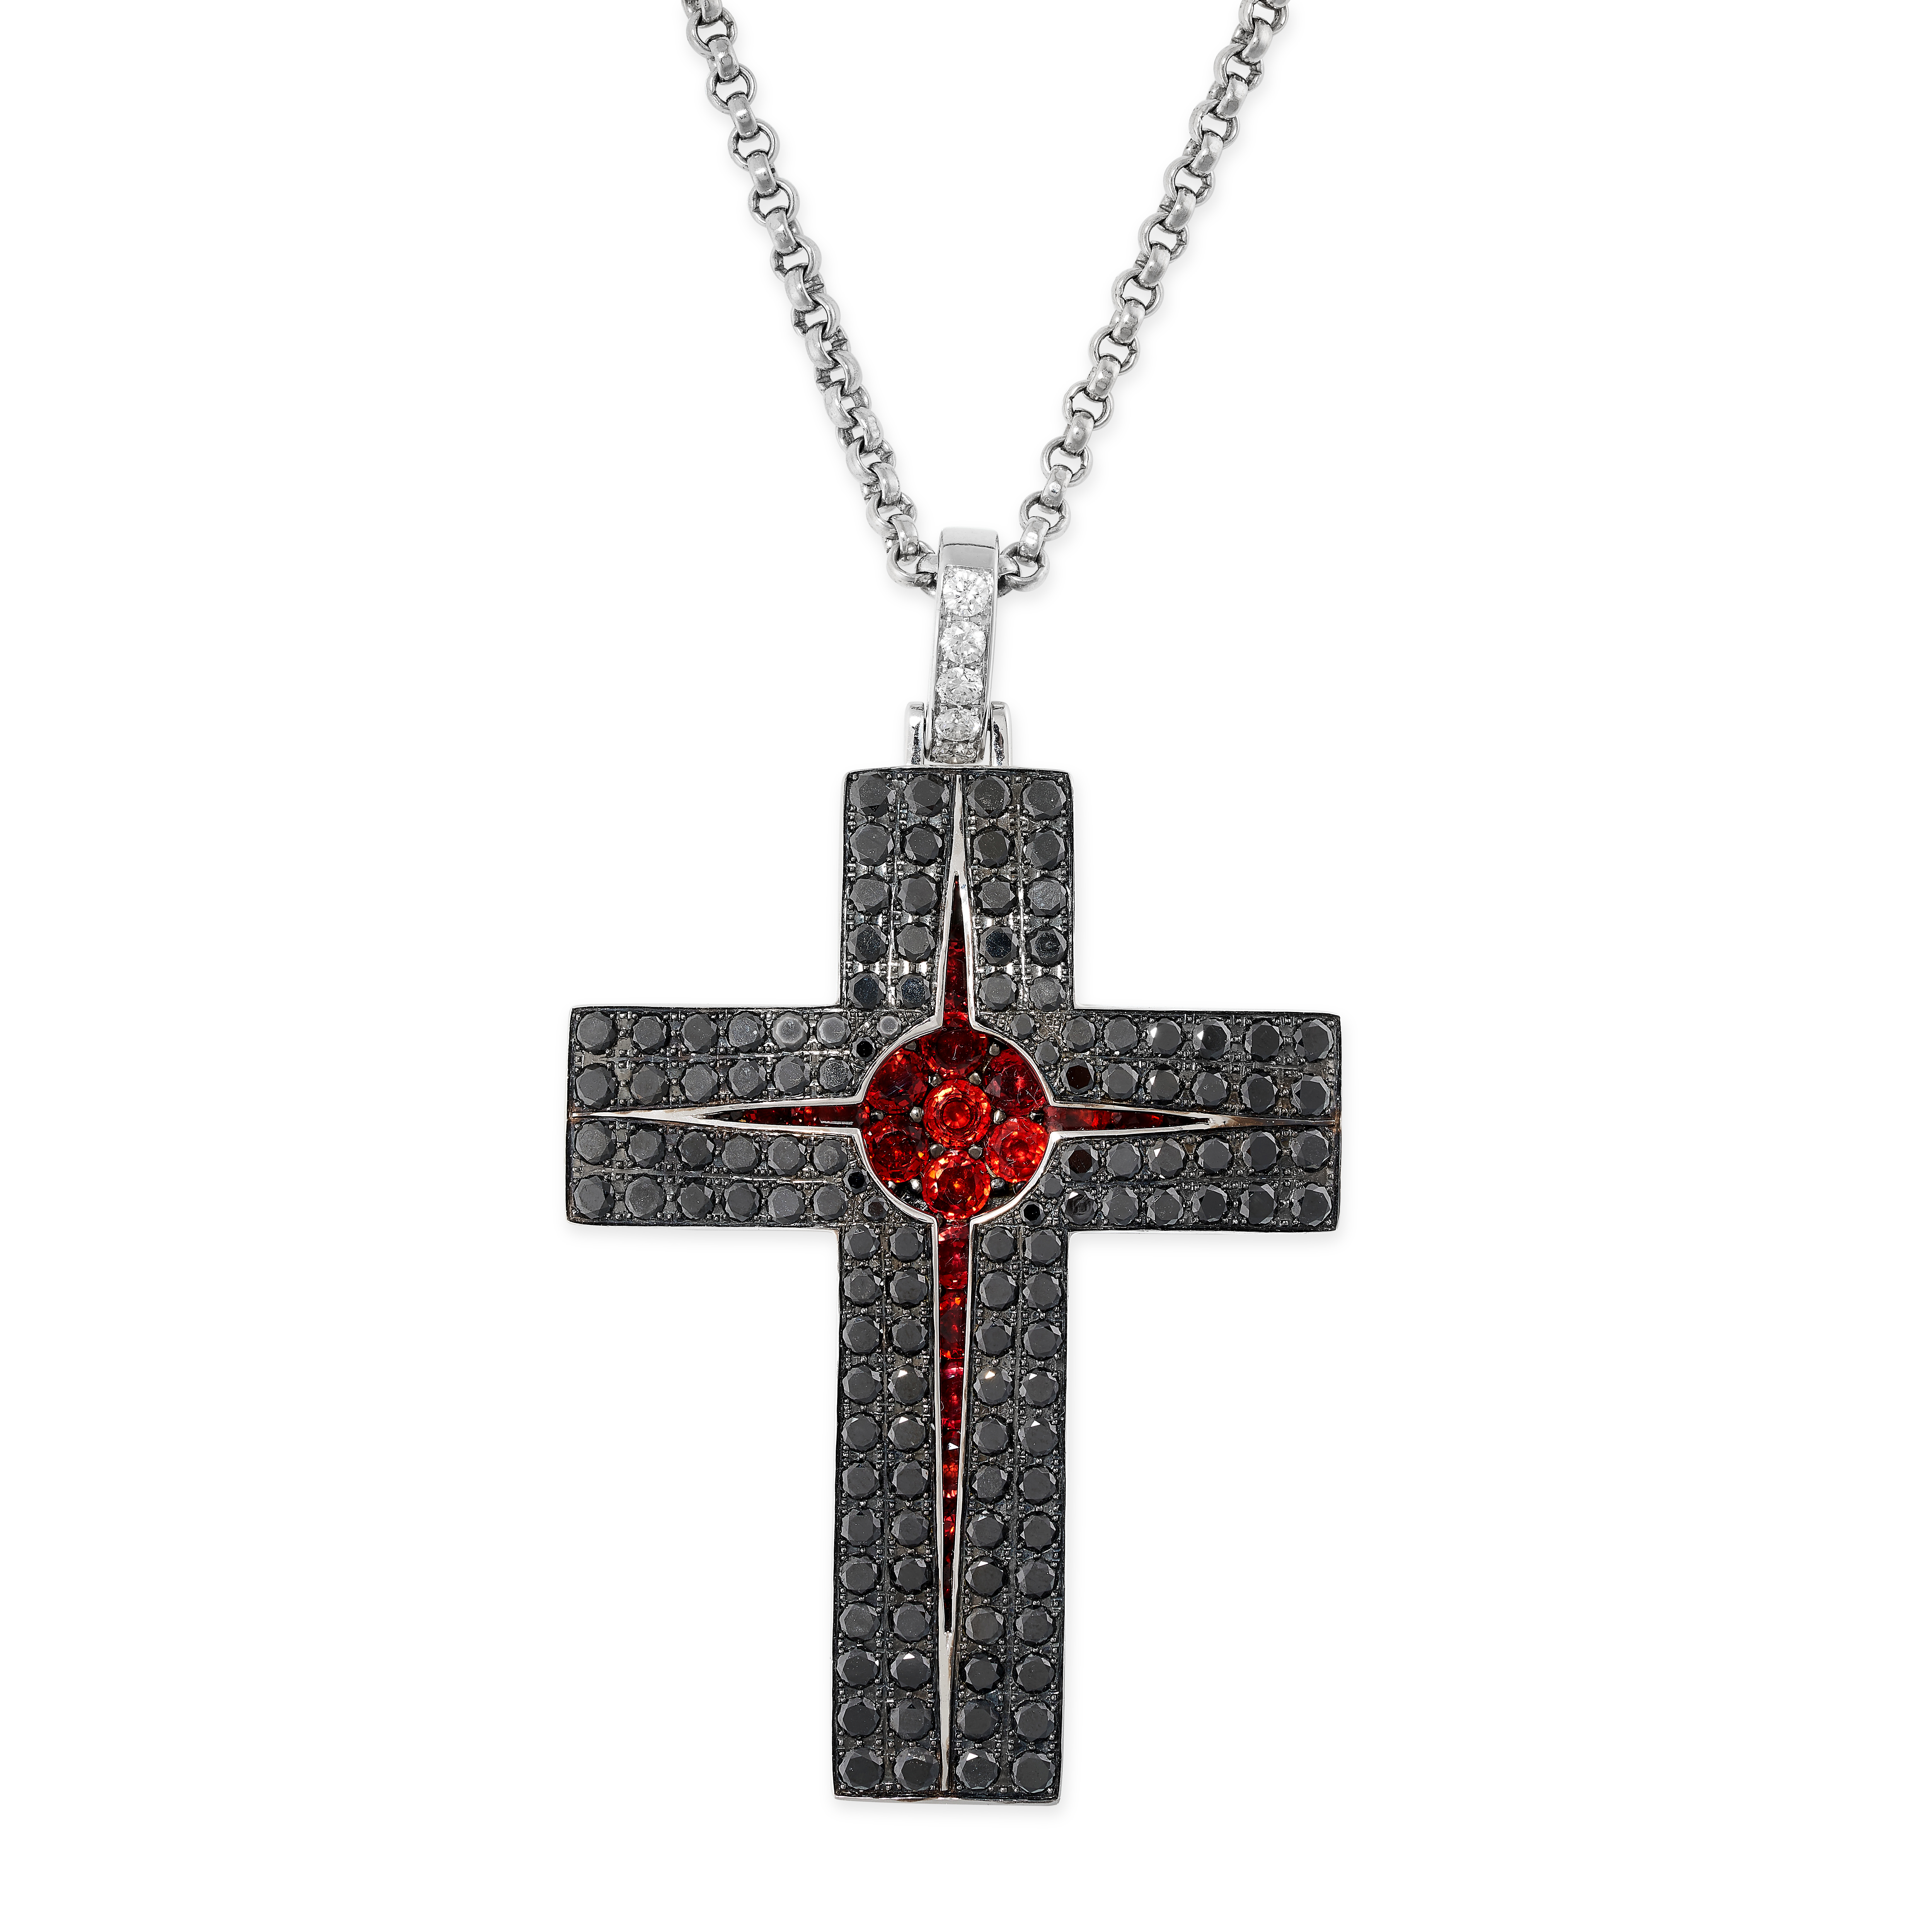 A BLACK DIAMOND AND GARNET CROSS PENDANT in 18ct white gold, designed as an openwork cross, the